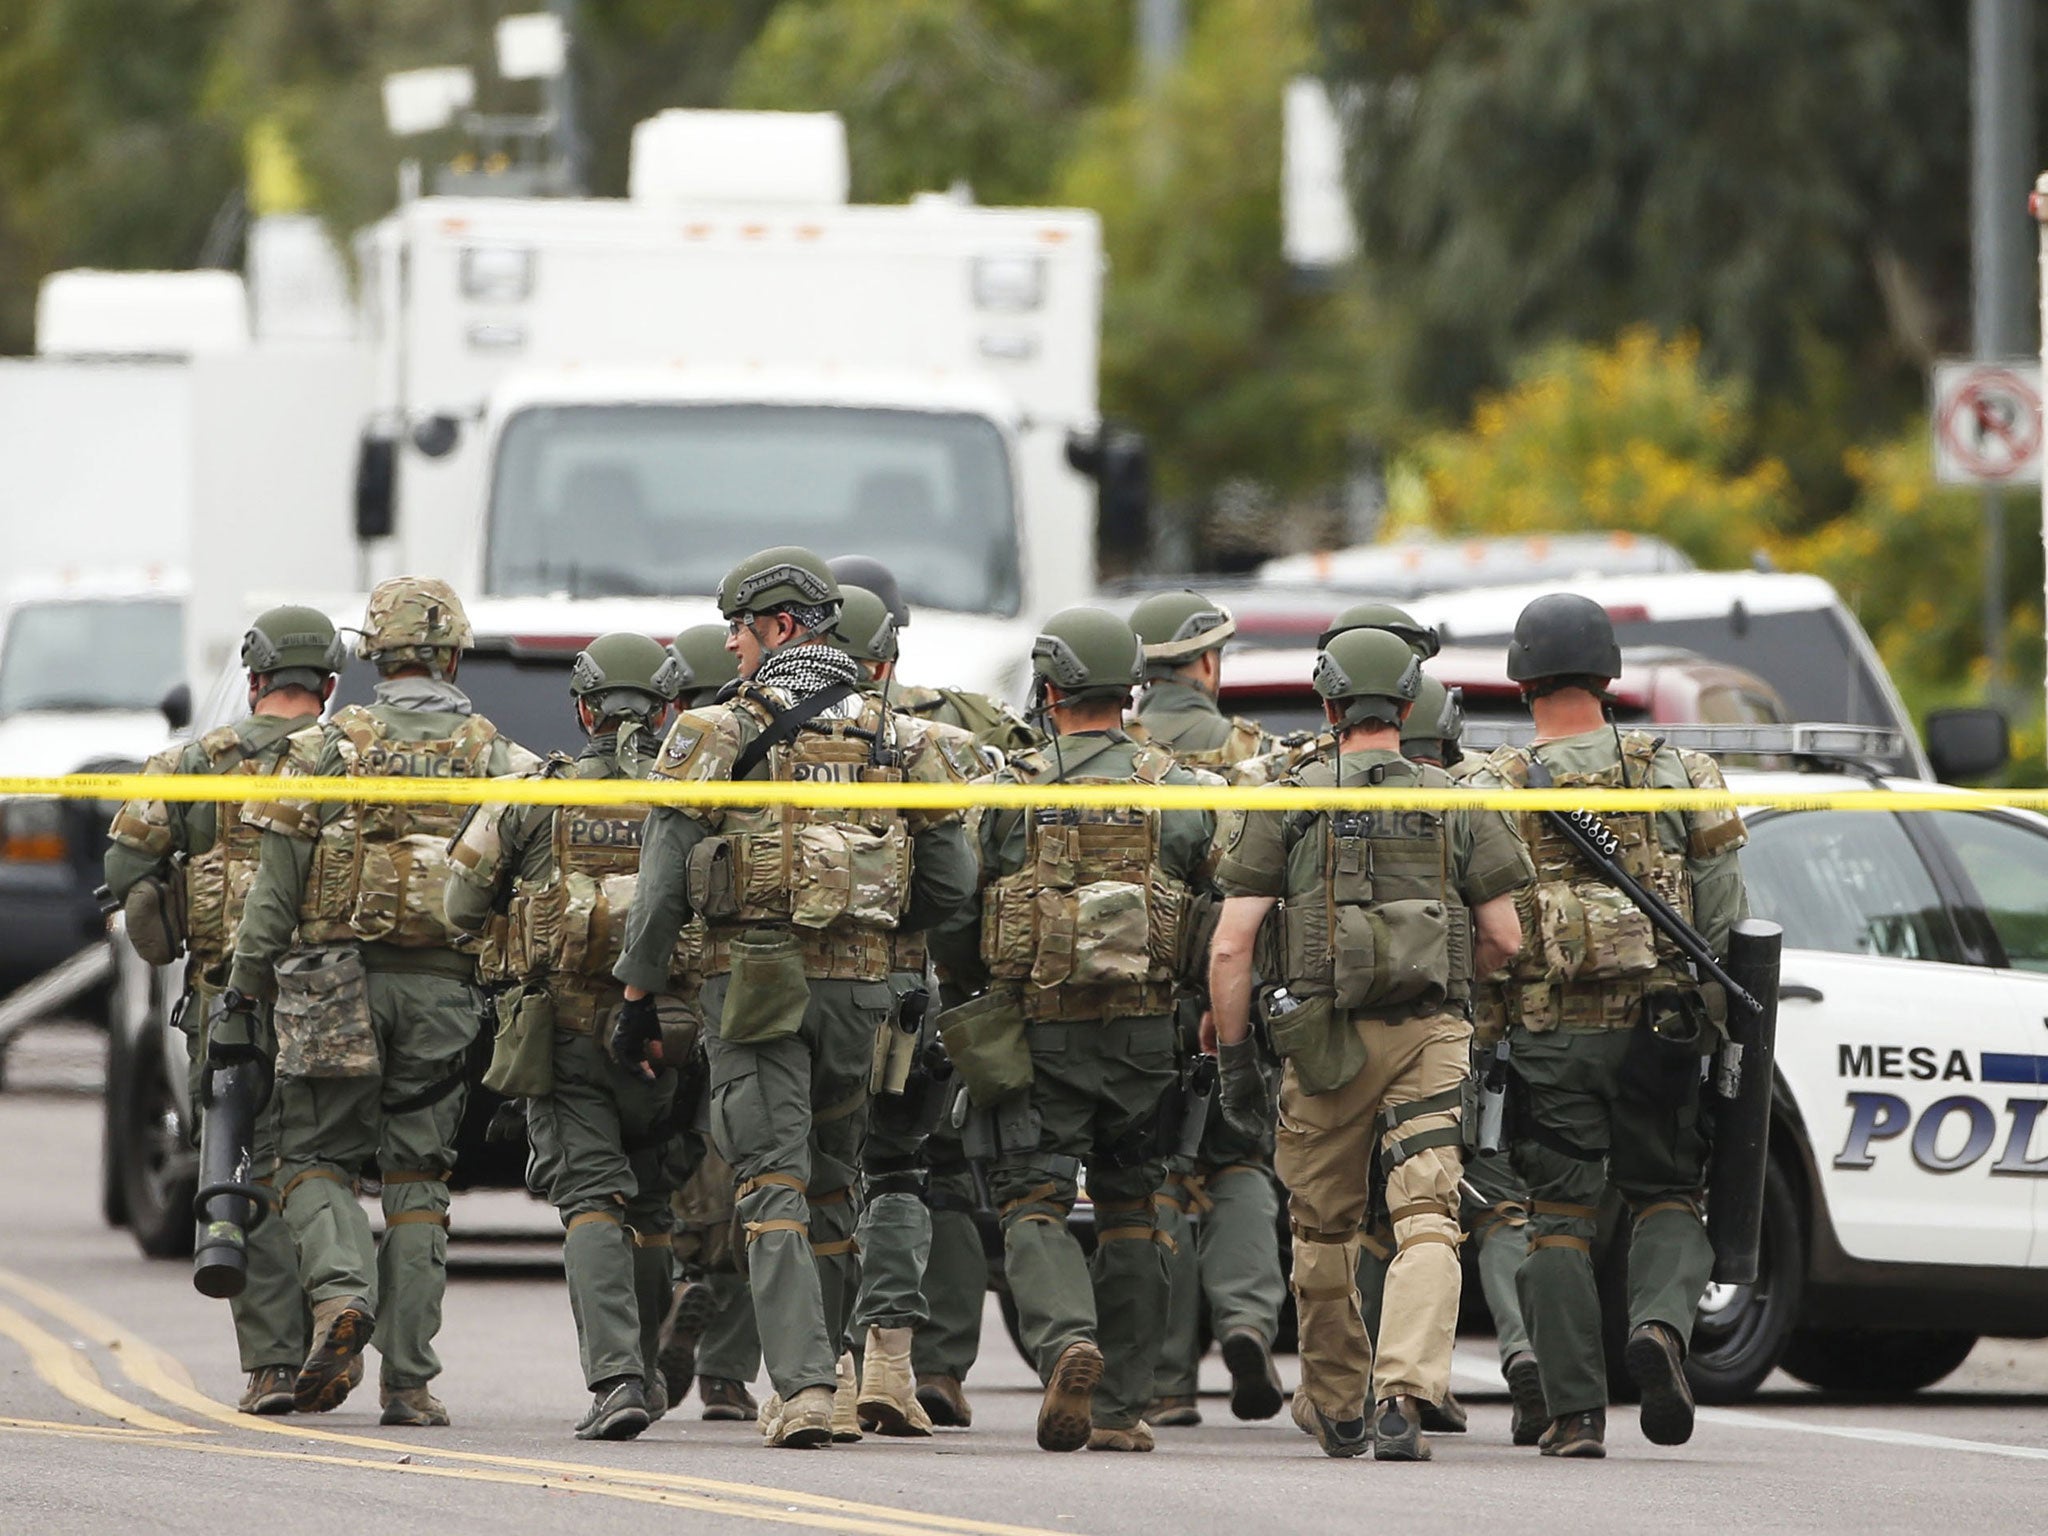 Swat teams were despatched to hunt down the gunman after the shooting in Mesa, Arizona